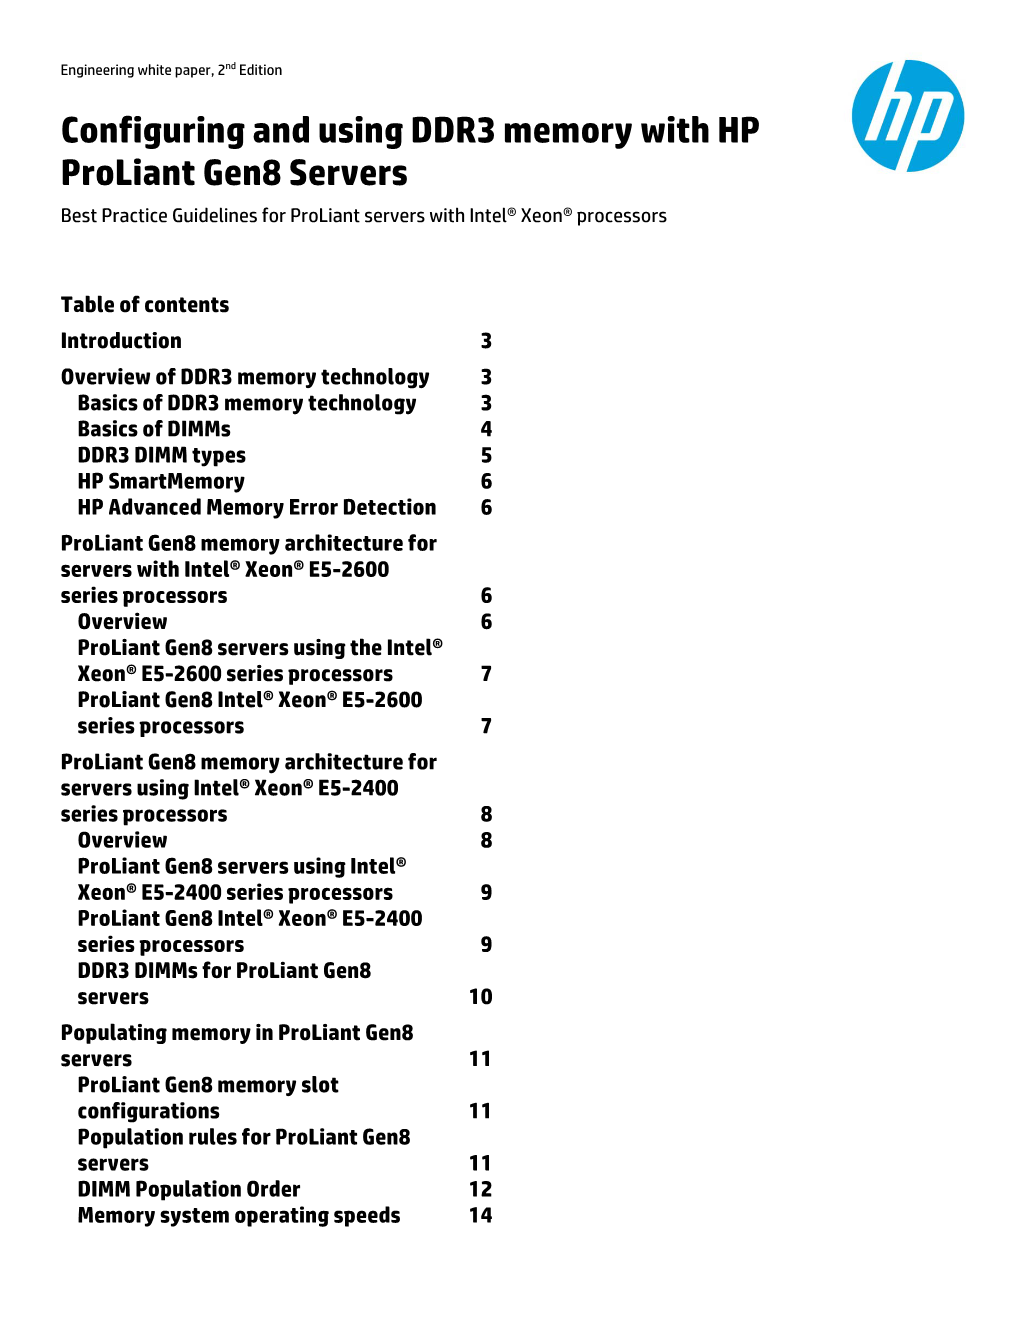 Configuring and Using DDR3 Memory with HP Proliant Gen8 Servers Best Practice Guidelines for Proliant Servers with Intel® Xeon® Processors